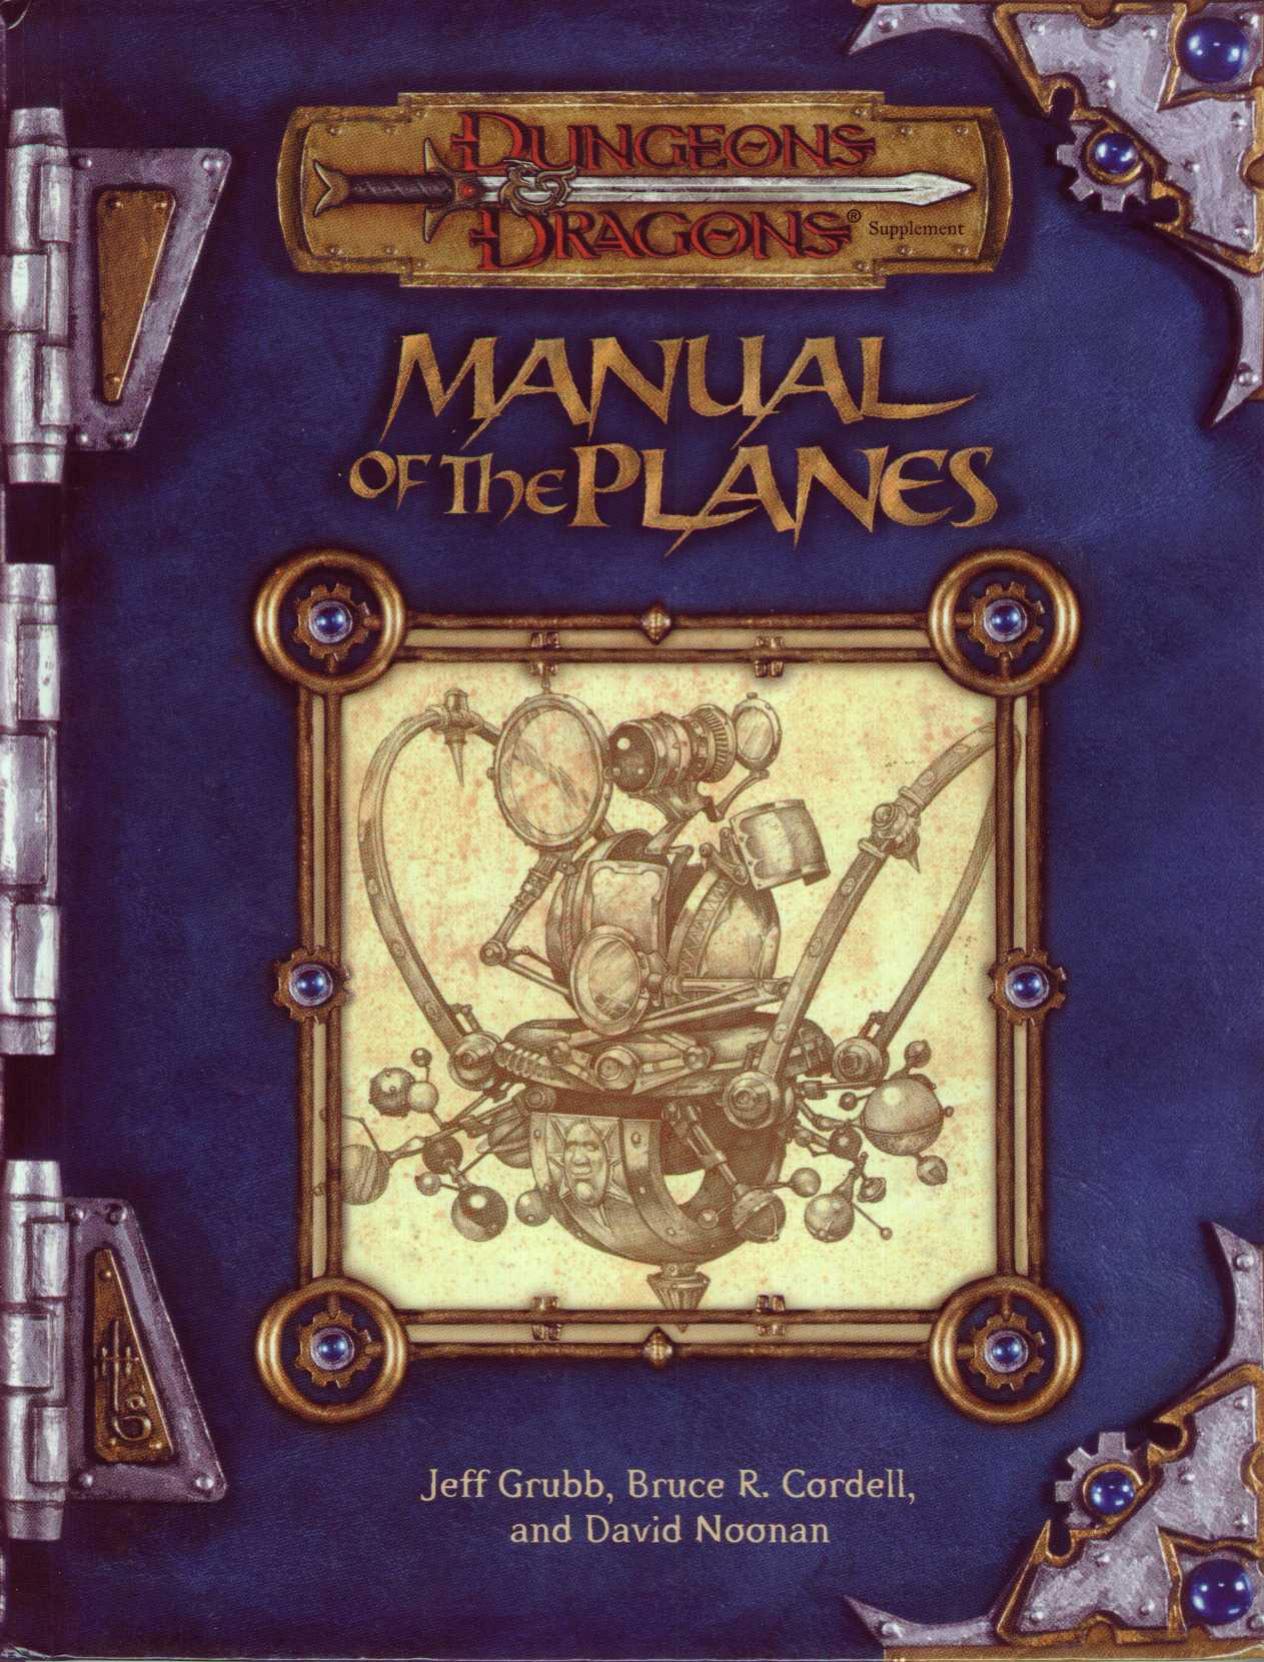 Manual of the Planes